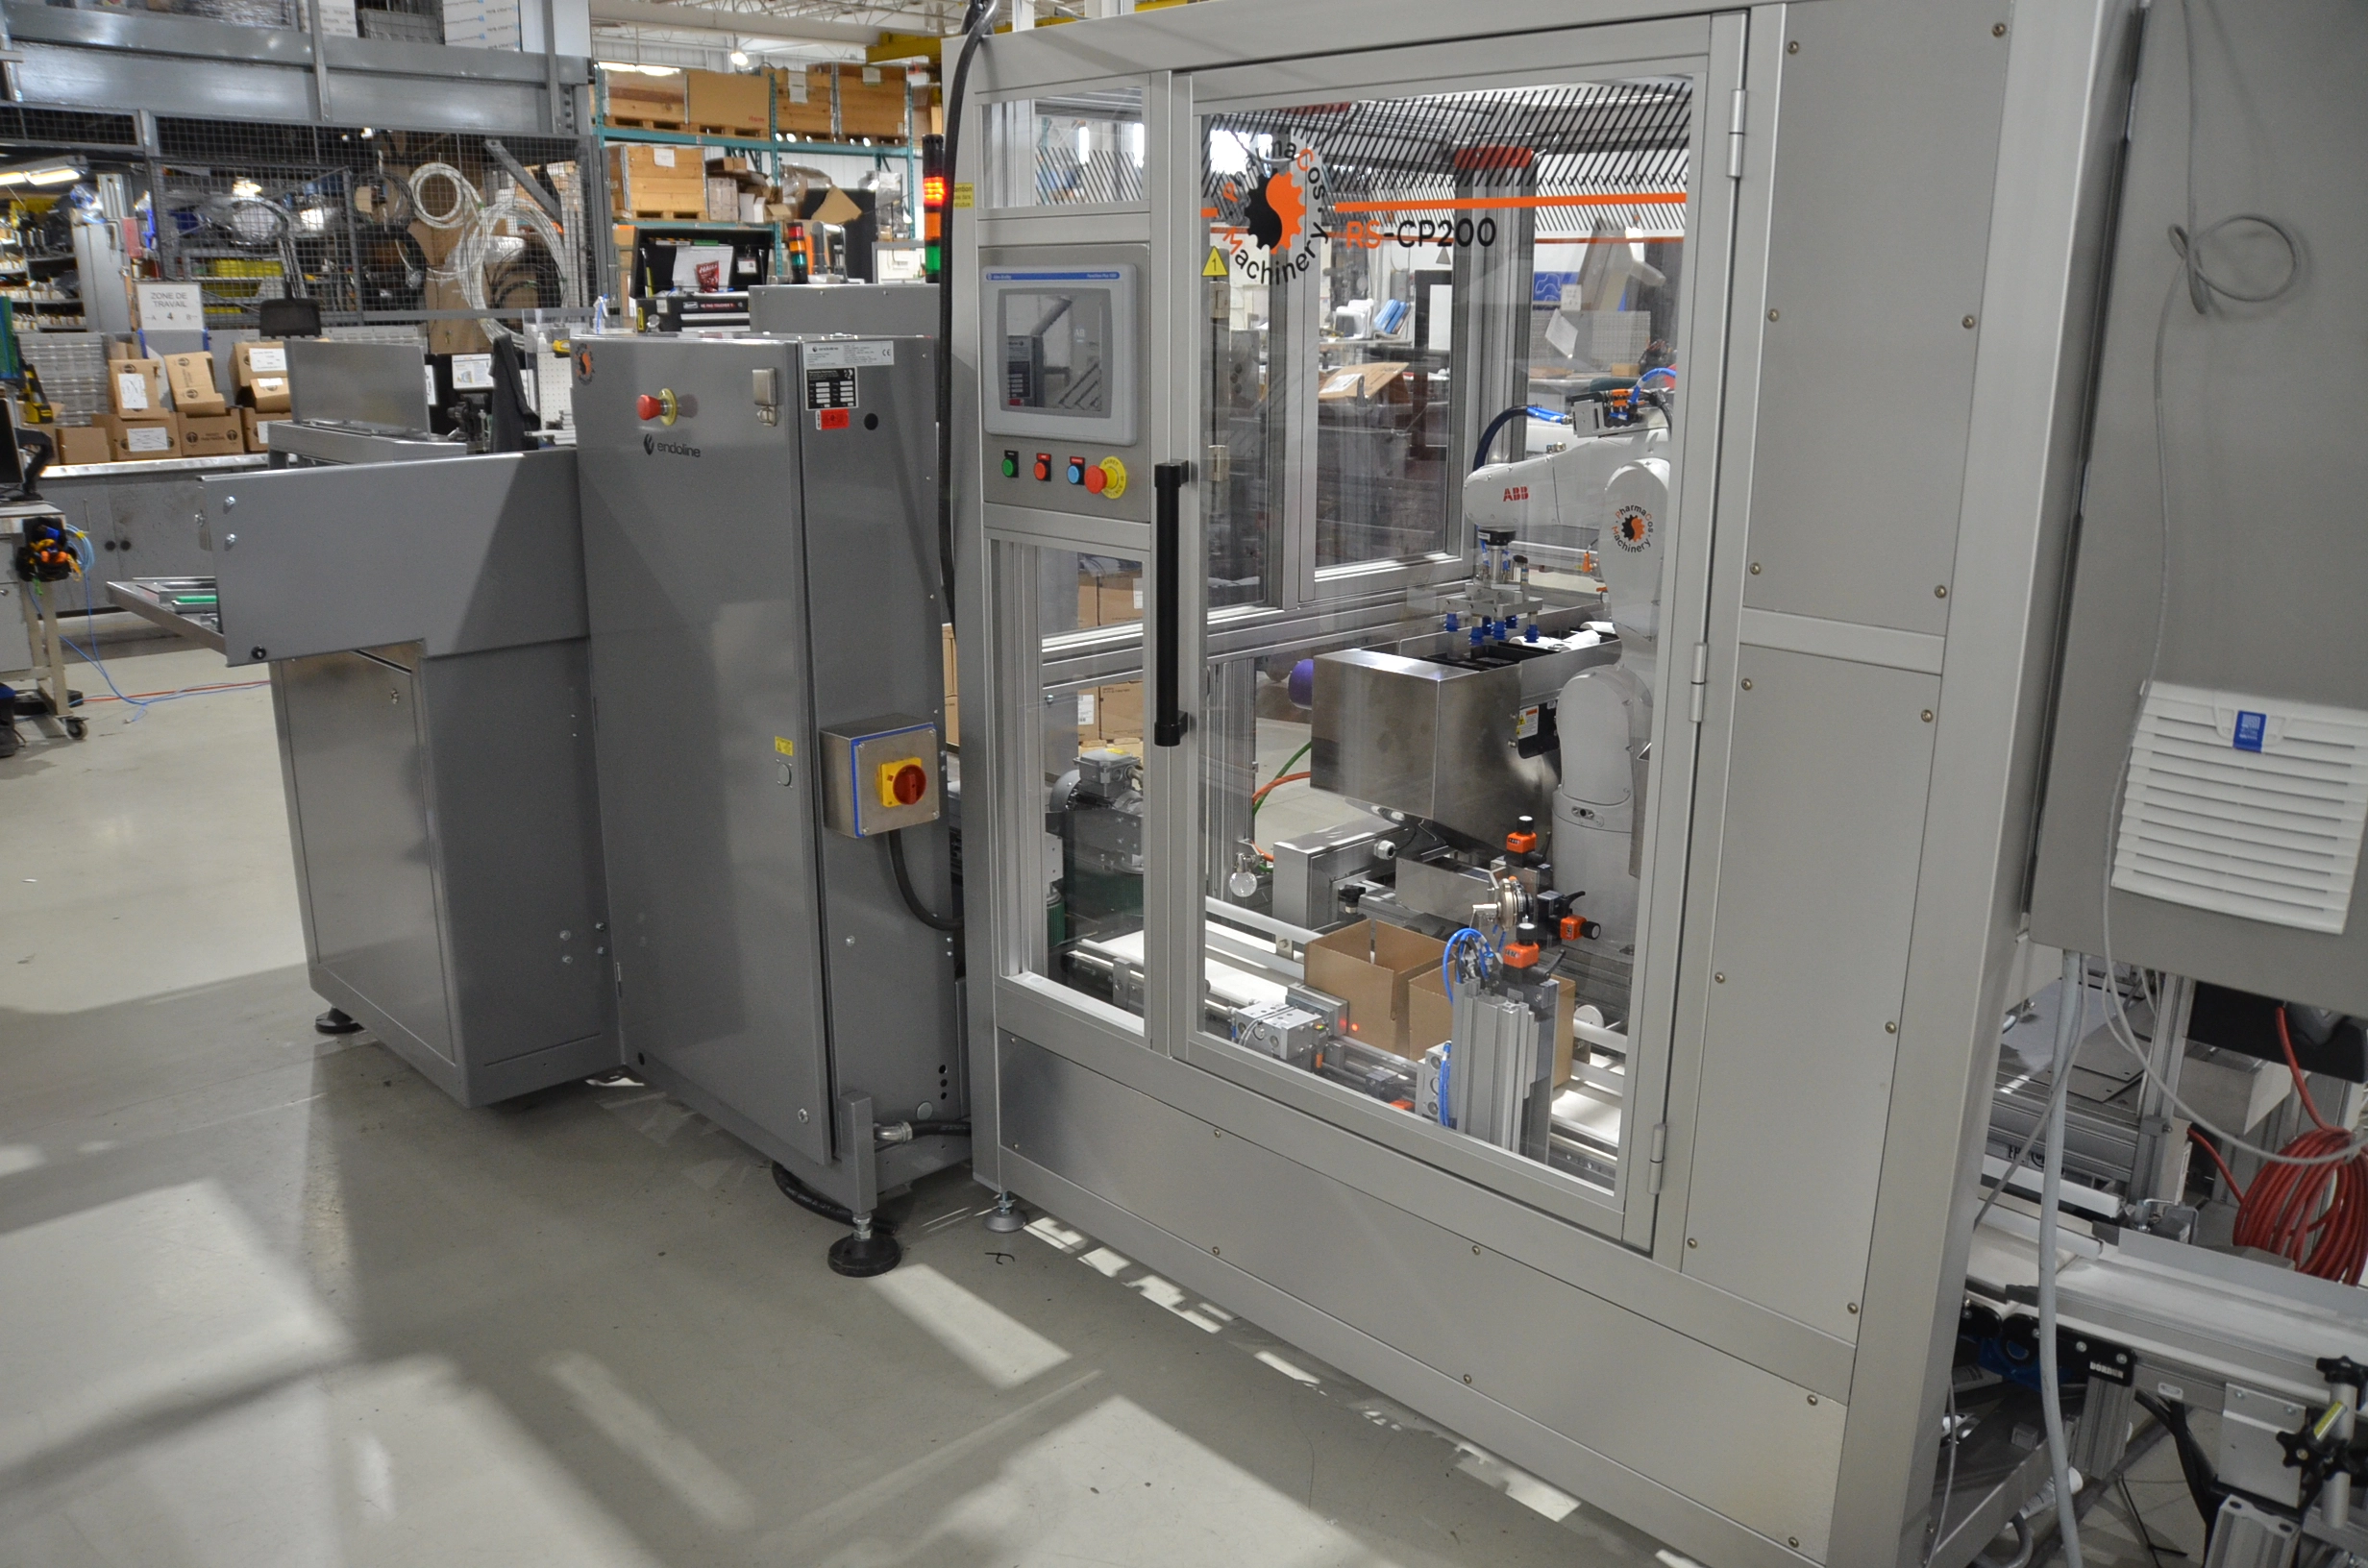 New PCM RS-CP200 robotic case packing system